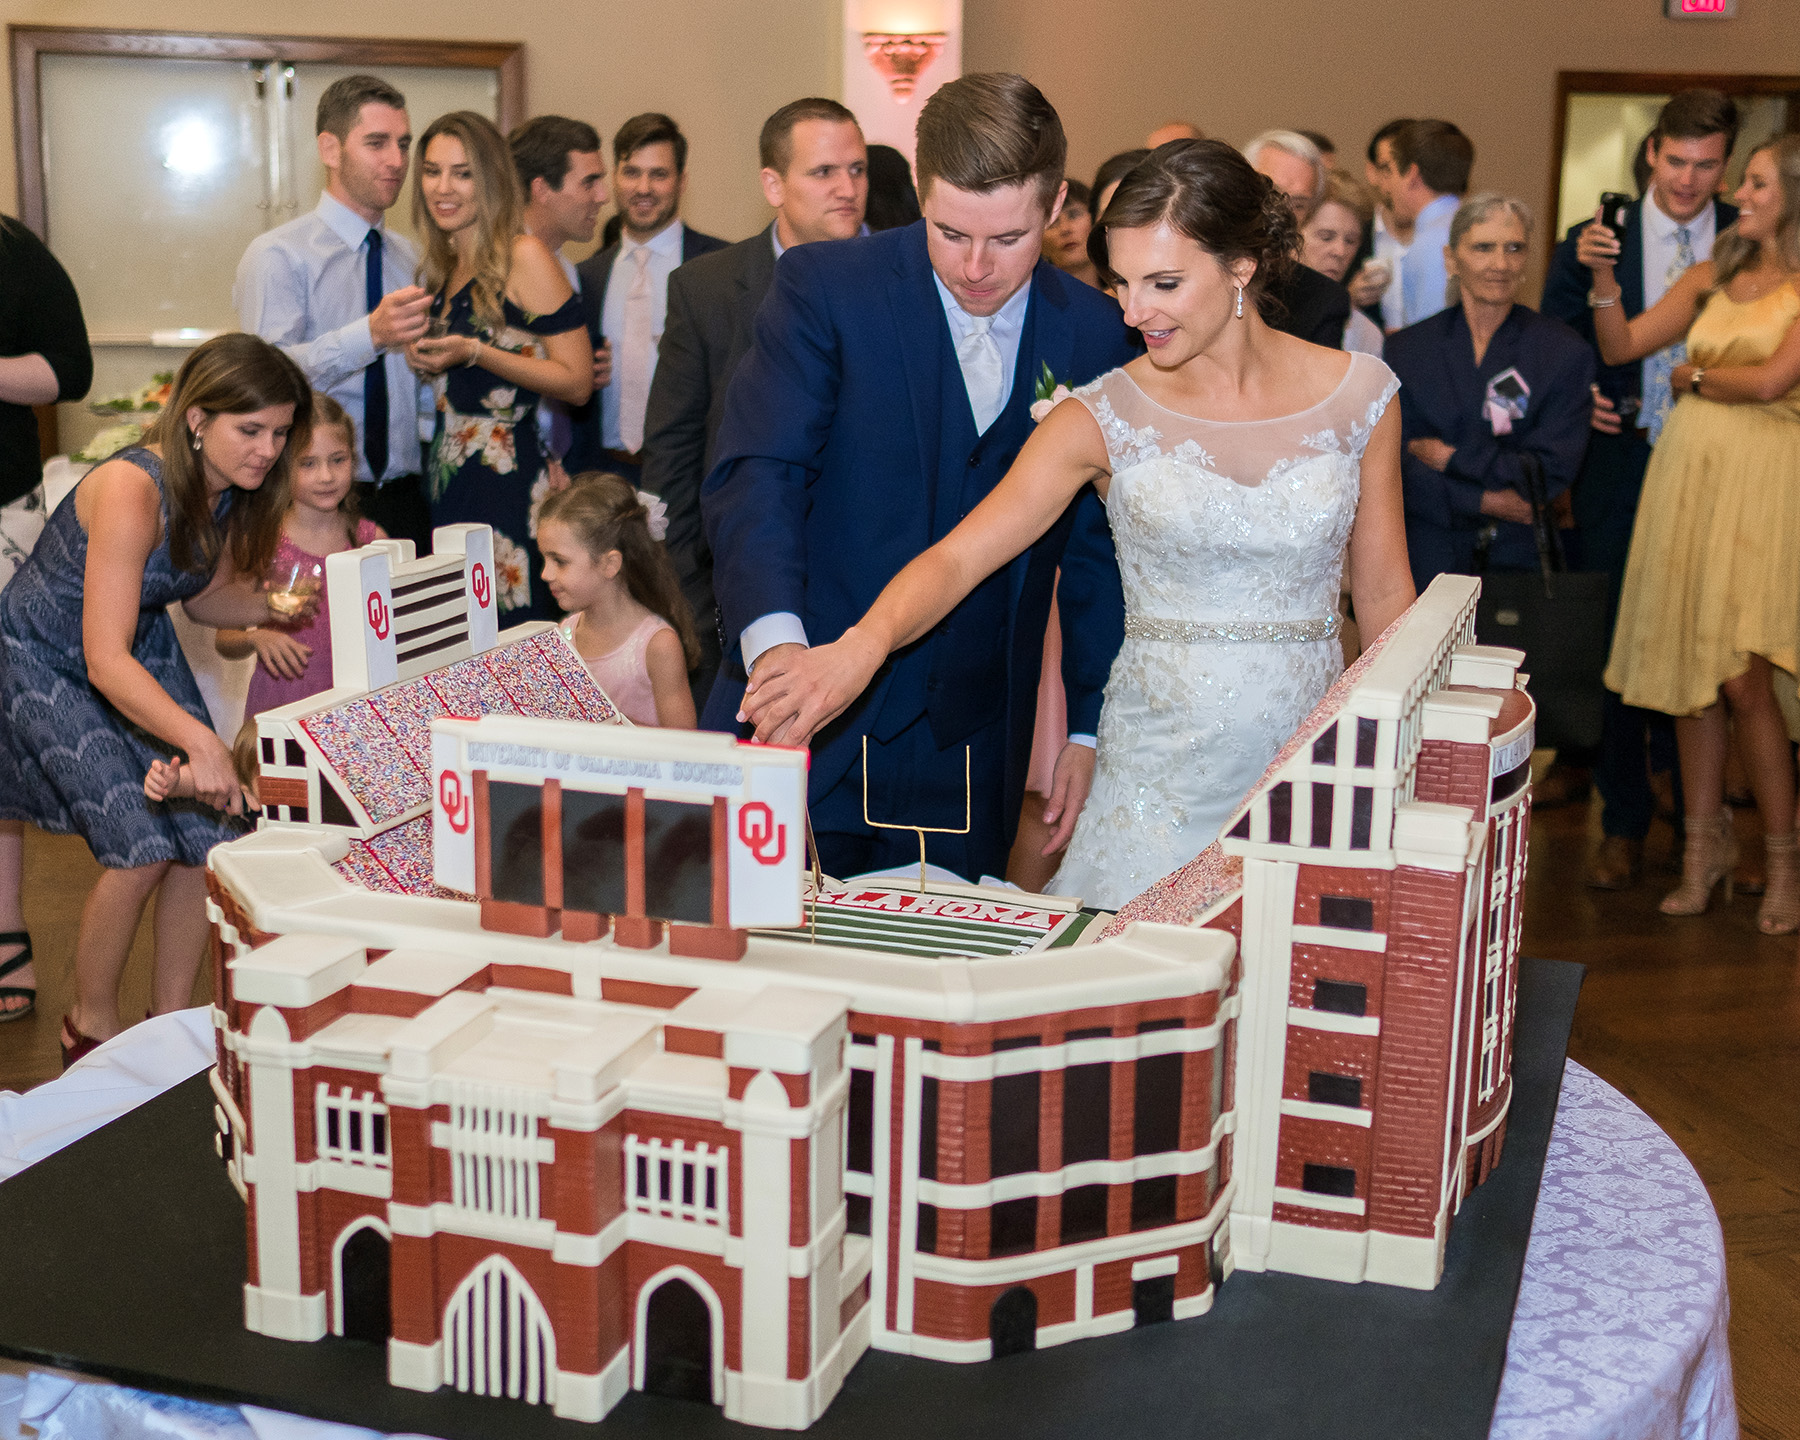 PHOTO: Bride Caddie Protor and groom Samuel Cox cut the cake on their wedding day. 